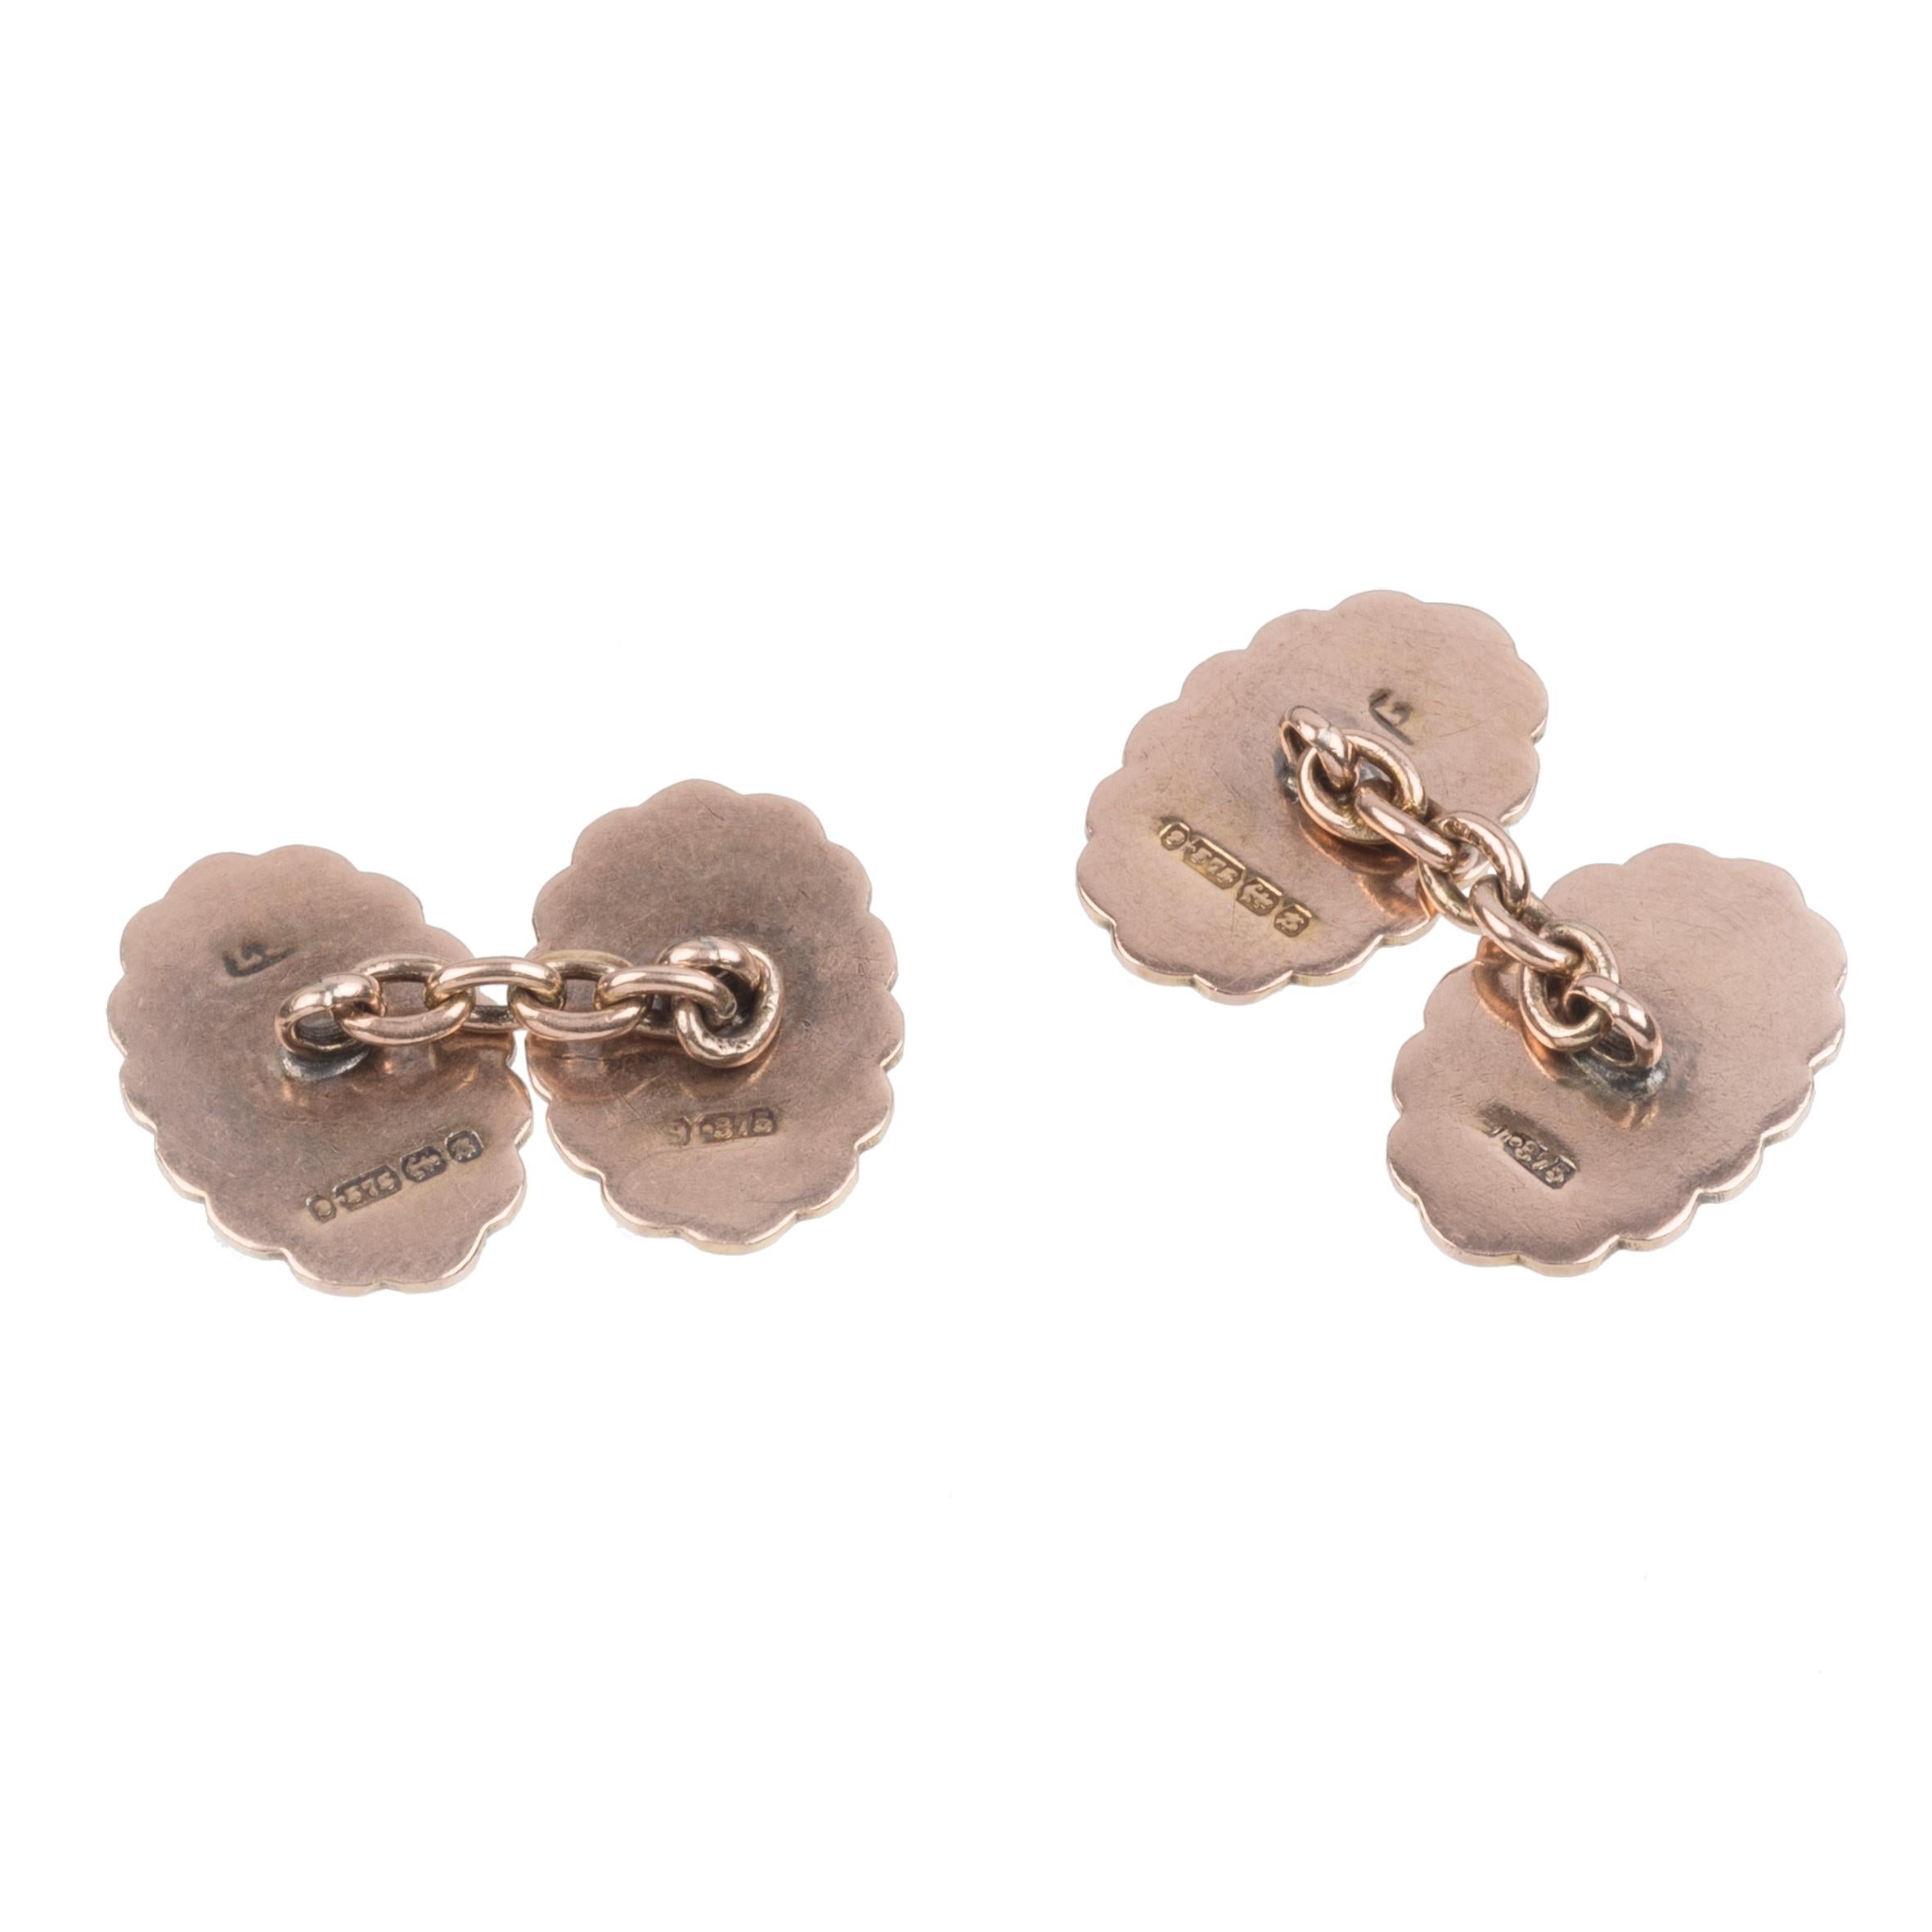 The fine Victorian cufflinks were made out of 9 karat rose gold in the last quarter of the 19th century. Four oval links with wavy edges asre finely engraved with a forget me not amidst leaves and foliage each. They are impressed with full British